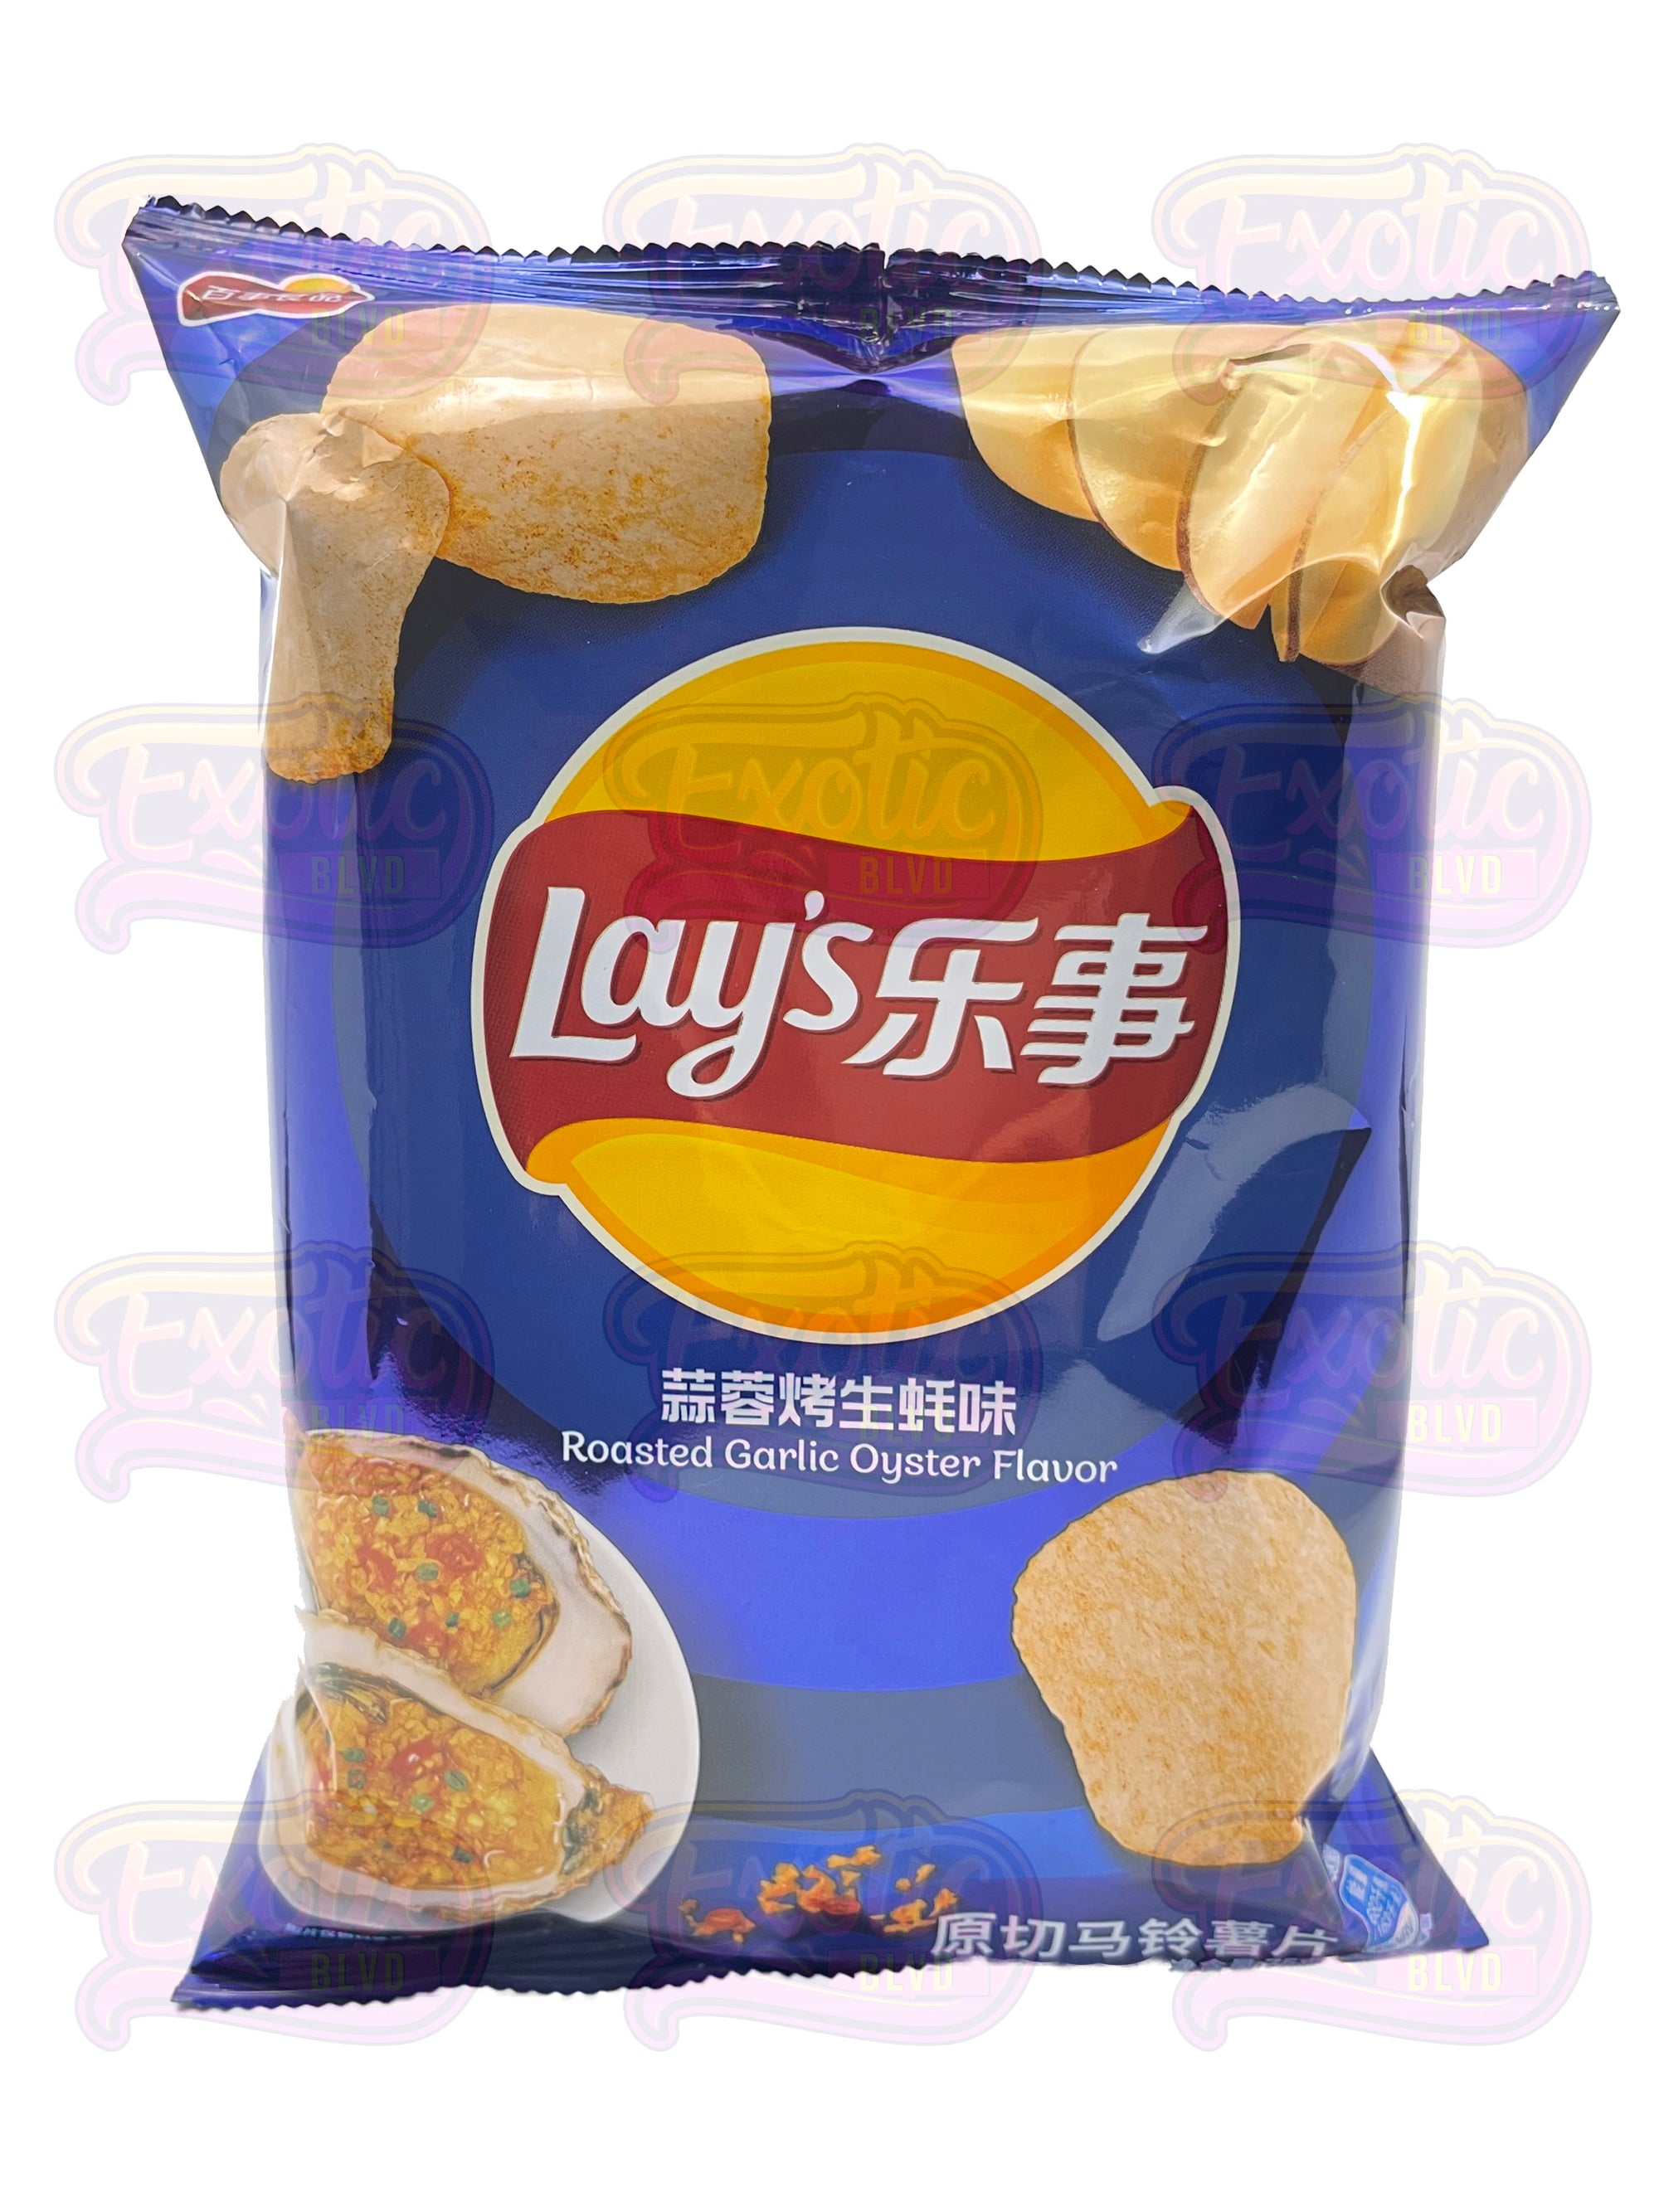 Lay's Roasted Garlic Oyster